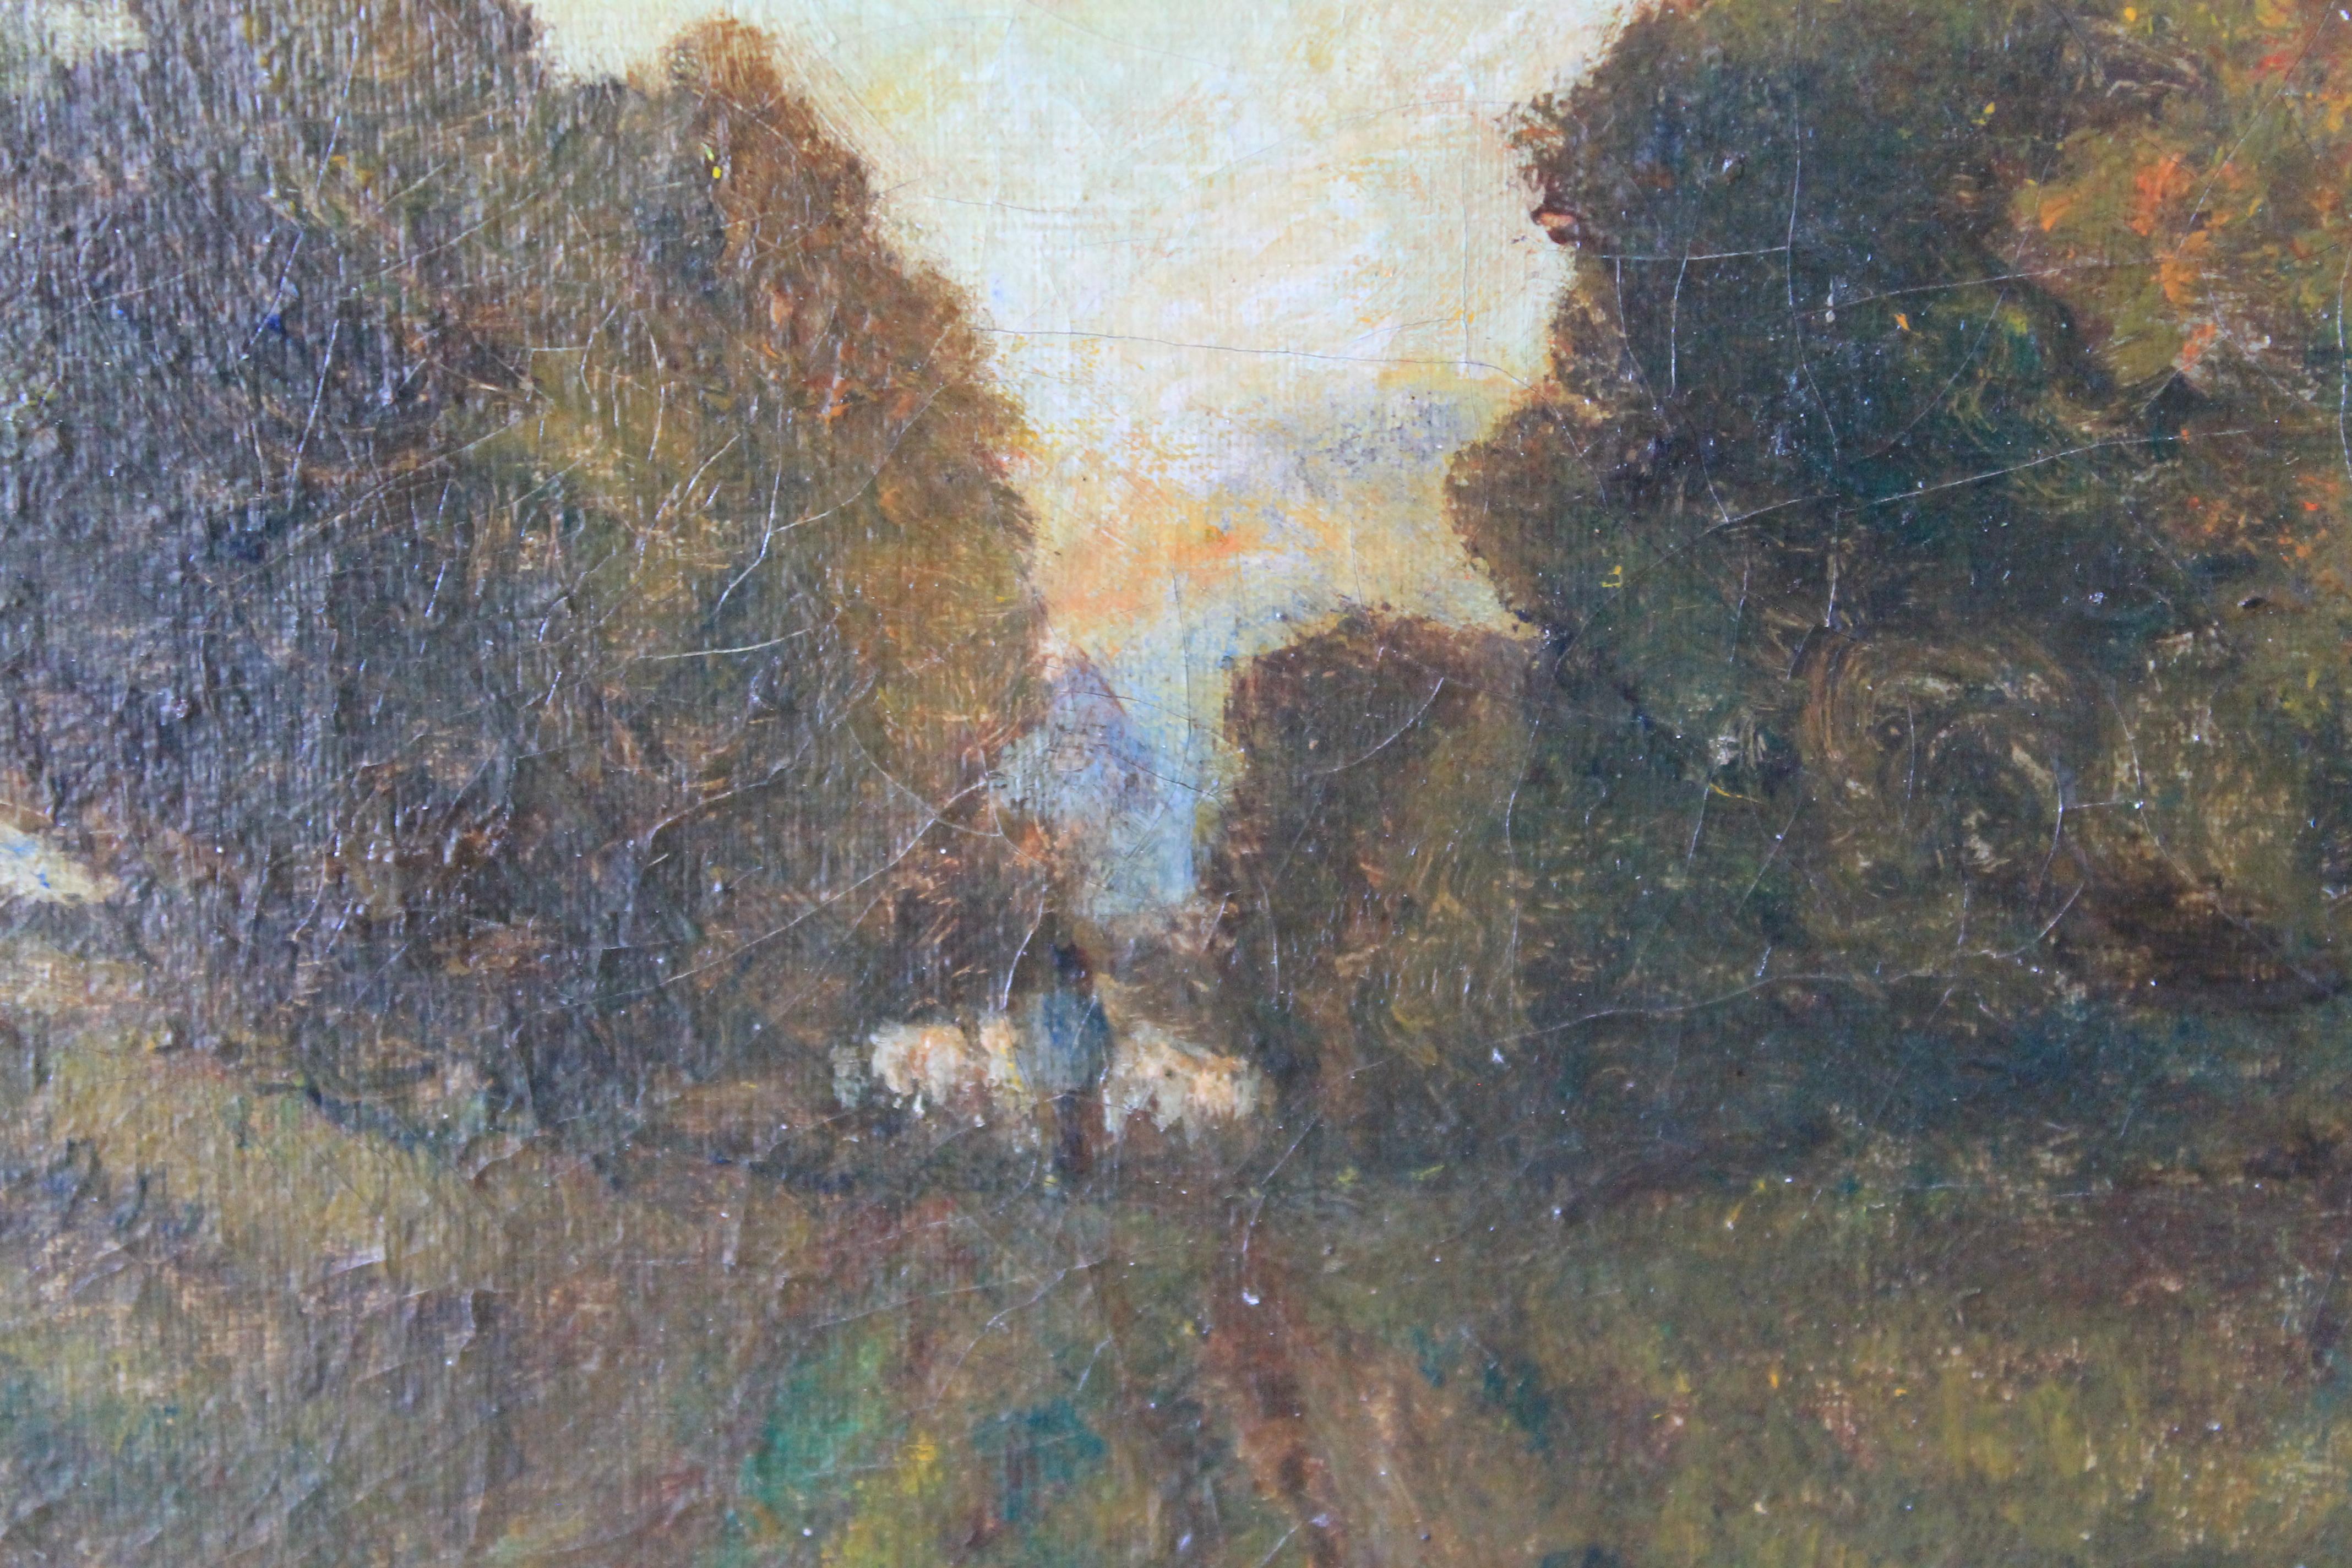 Antique impressionist landscape oil painting on a nicely stretched canvas of a farmer and his sheep walking down a country lane.  Authentic French Barbizon School oil painting.   The scene is the bucolic countryside of France.  The canvas is